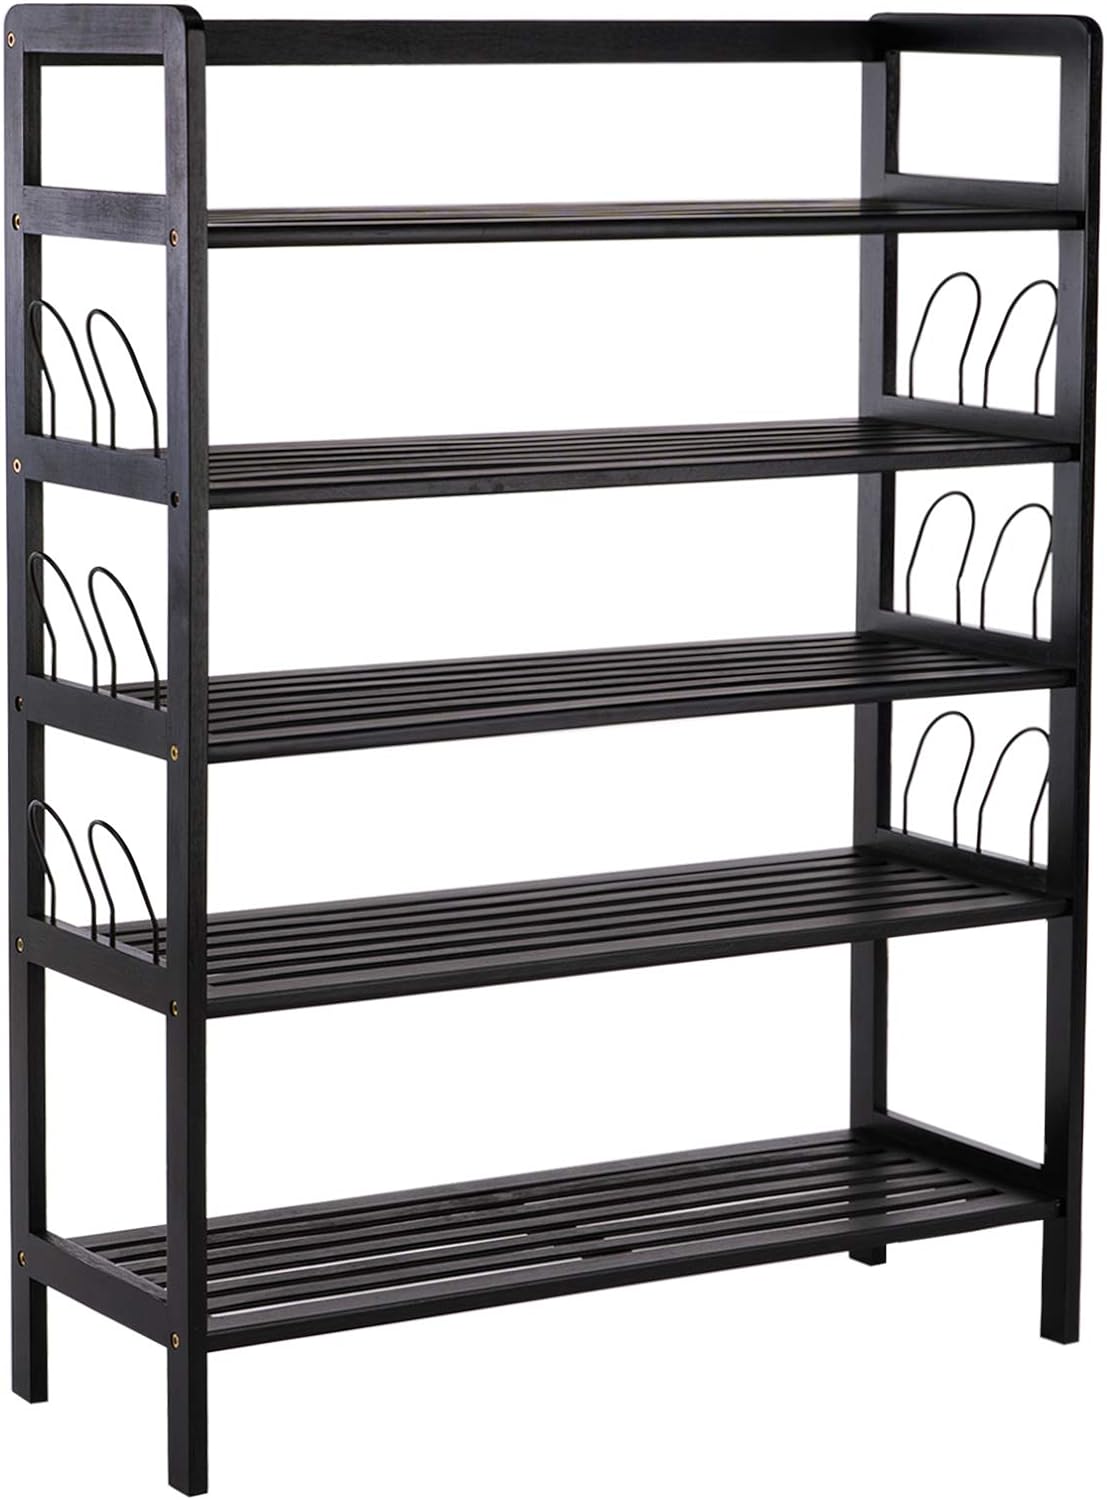 With five tiers, this shelf can help clean up a lot of clutter. I had a space in a hallway where I needed a tall narrow shelf that wasn't too wide. This is 3' high and it fits.I chose it over another similarly priced shelf because it weighed twice as much and I was hoping this would be slightly sturdier. I wasn't disappointed. A moderately-priced unit with slat-shelves is never going to be super sturdy, but it' doing the job and is less likely to tip over than the flimsier model.Assembly was st